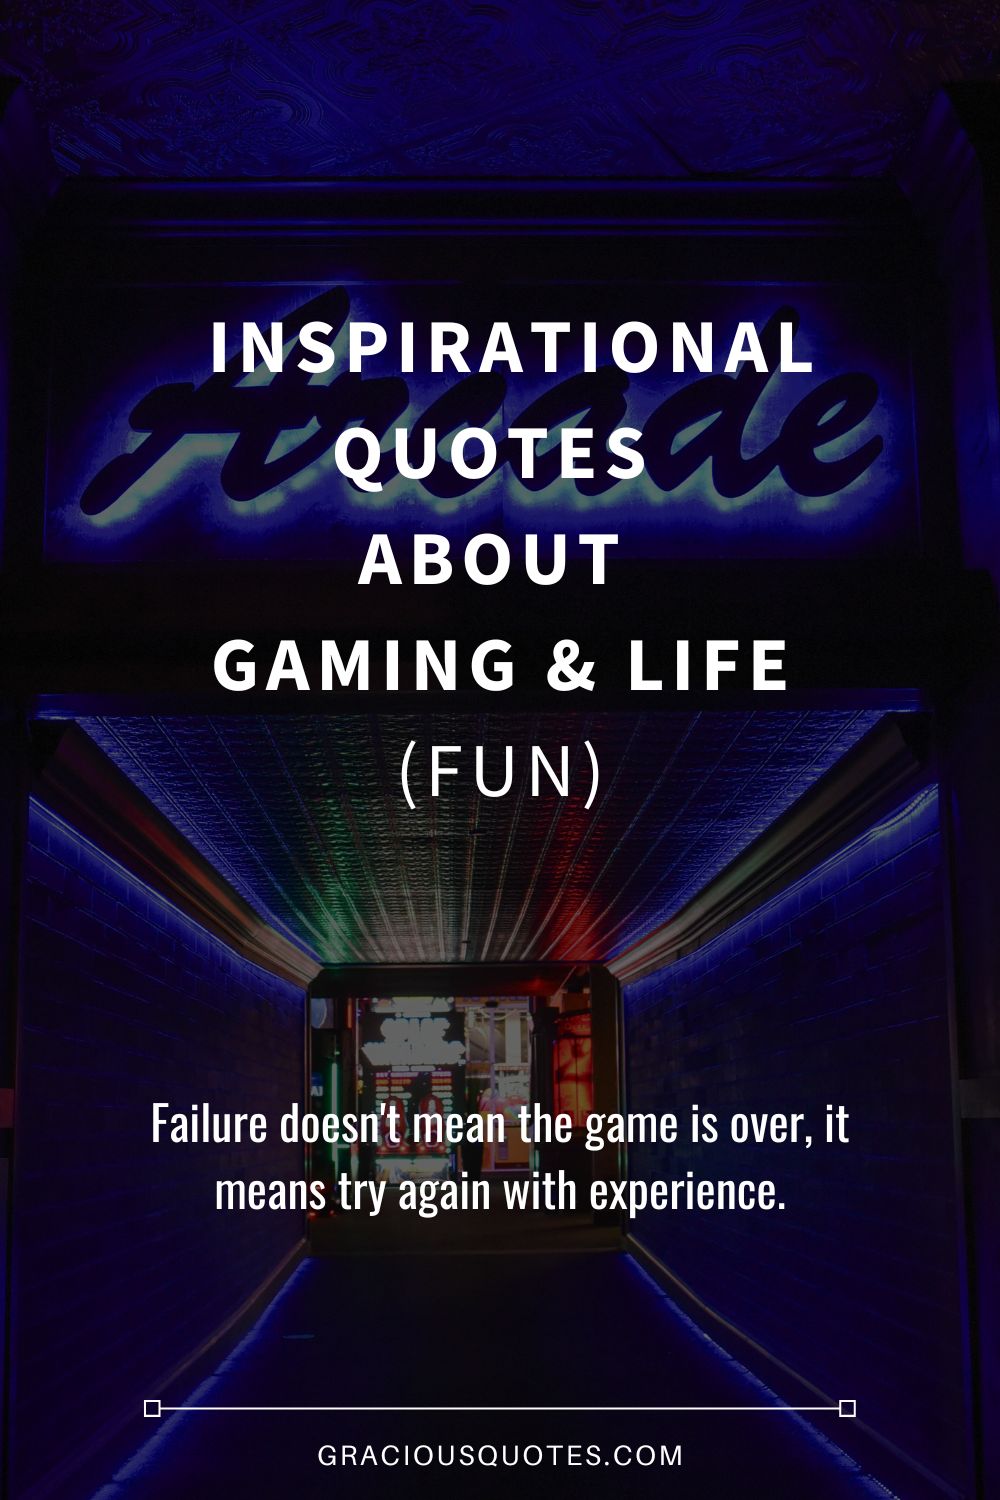 90 Video Game Quotes That Relate Video Games and Real Life